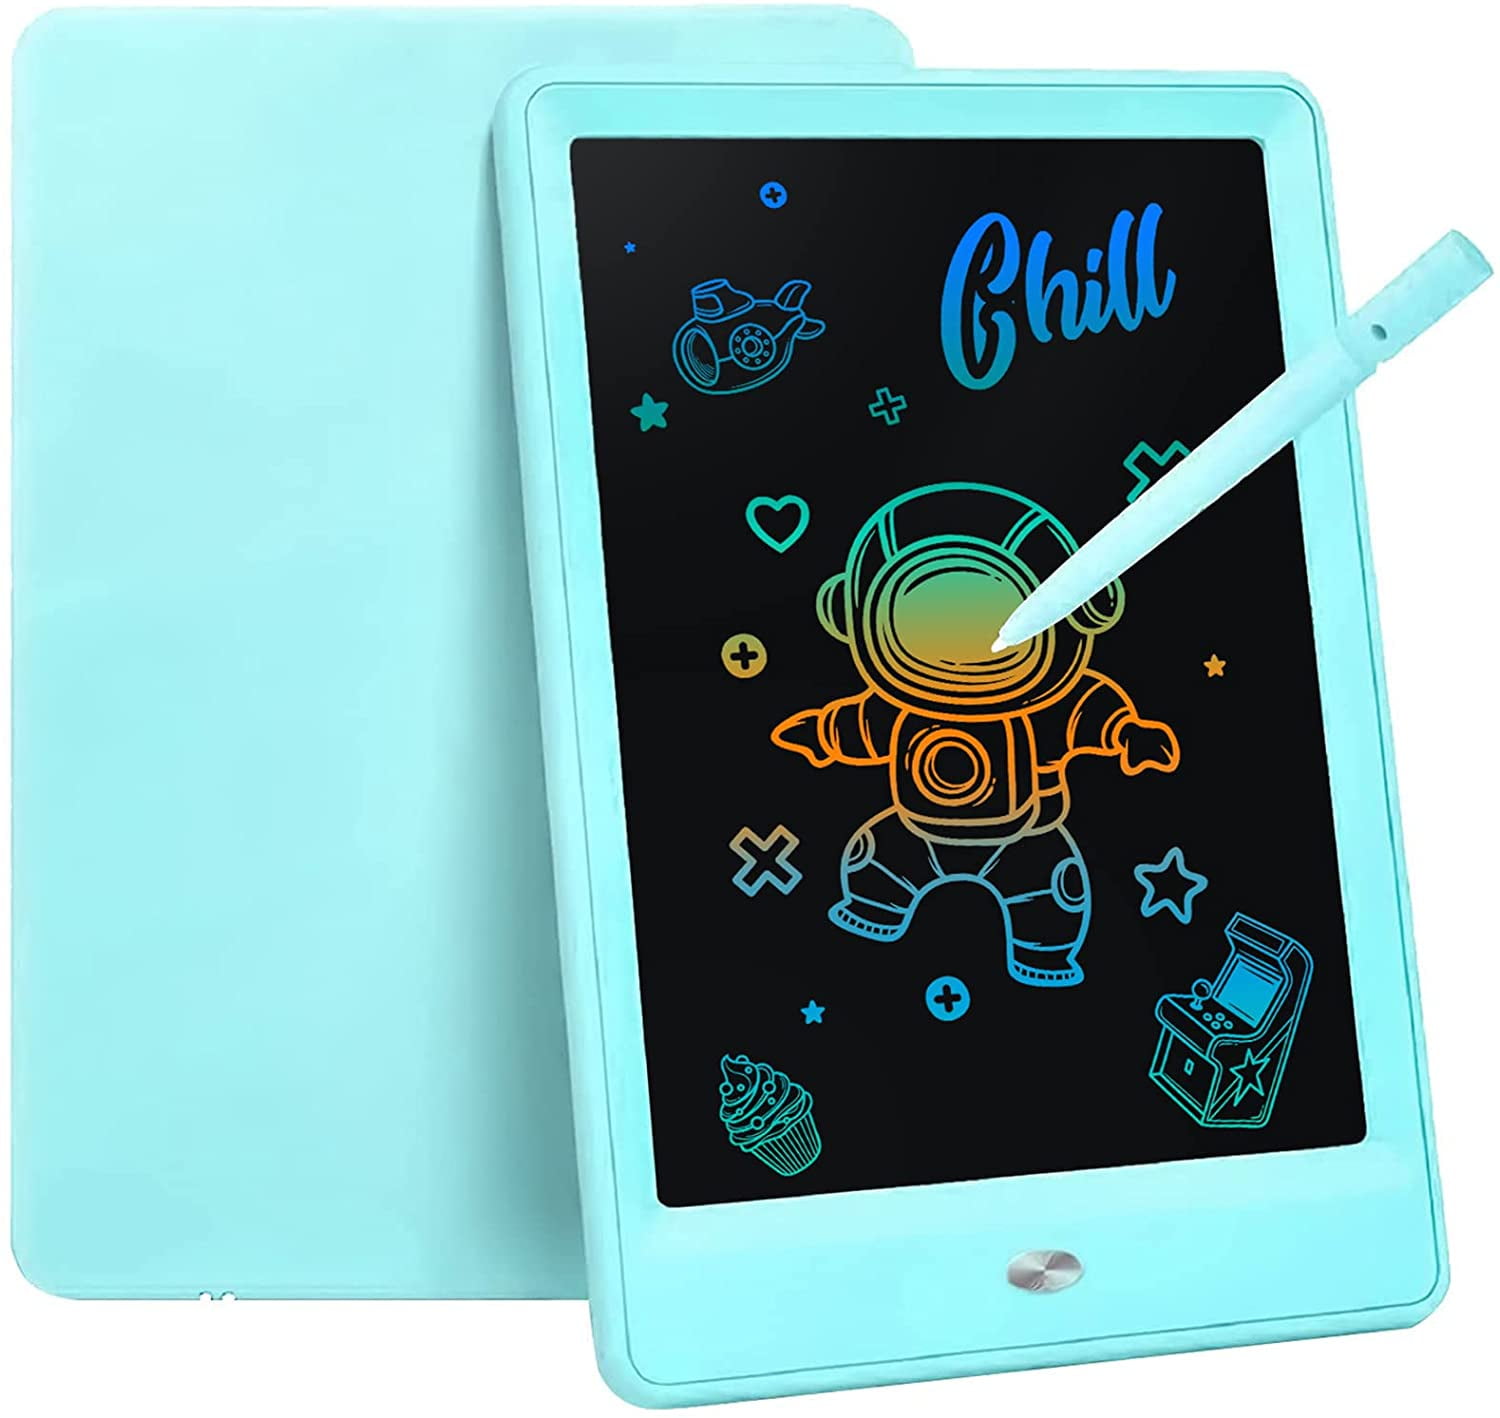 Richgv LCD Writing Tablet Doodle Board Boys Girls Gifts Educational Learning Toys for 3 4 5 6 7 8 yeas Old Kids 12 Inch Colorful Drawing Tablet Writing Pad Portable 